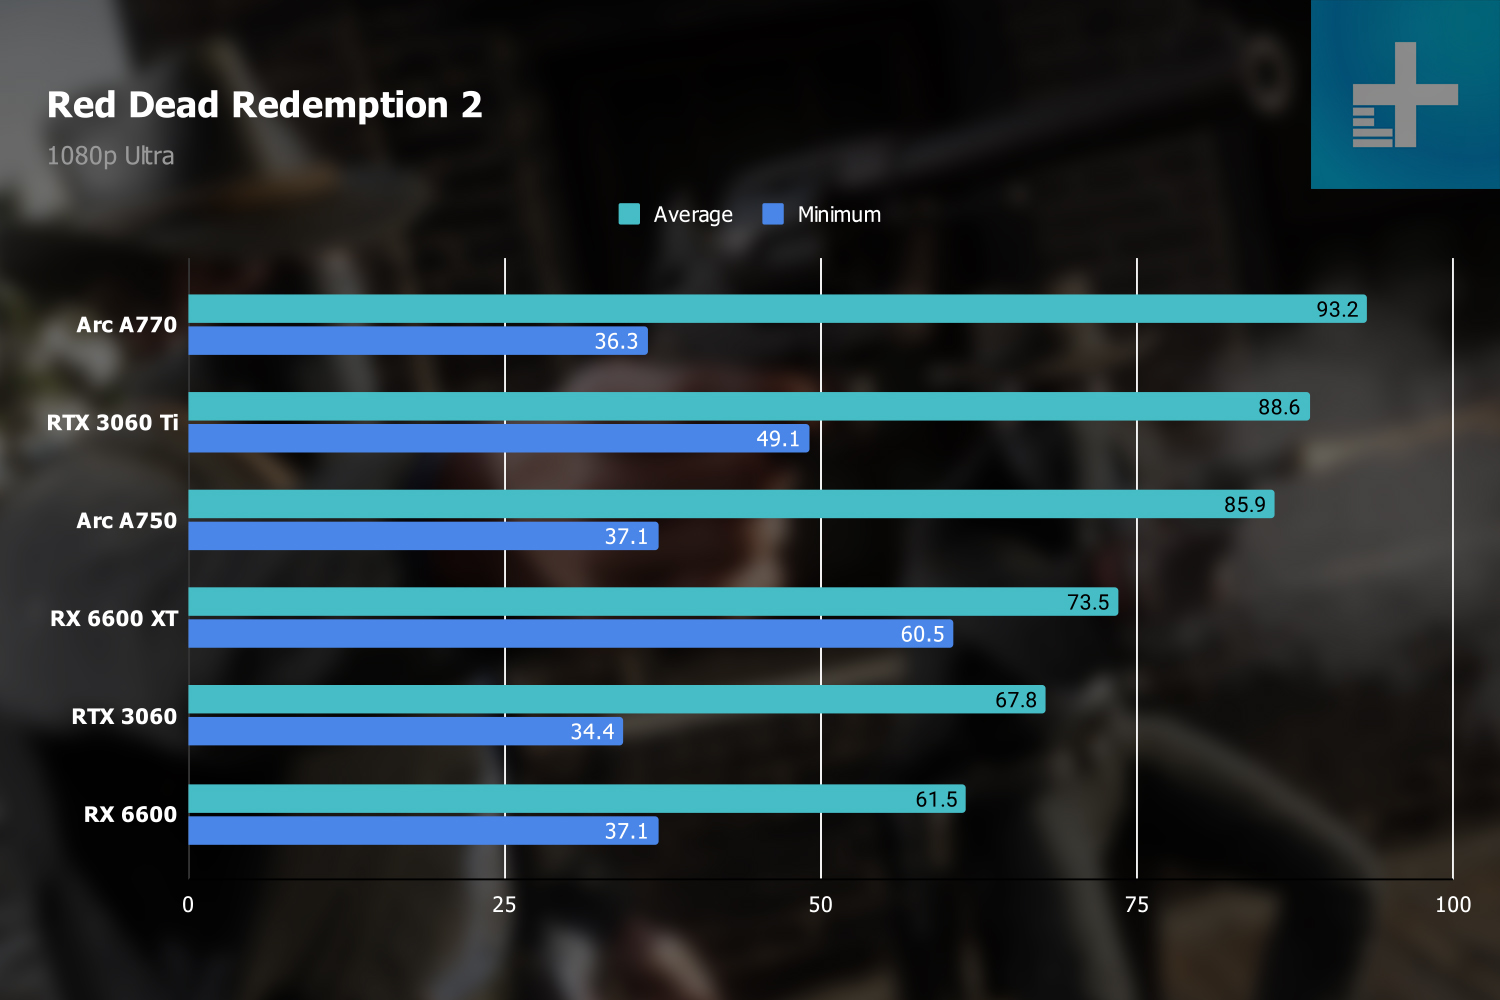 Red Dead Redemption 2 1080p benchmarks.